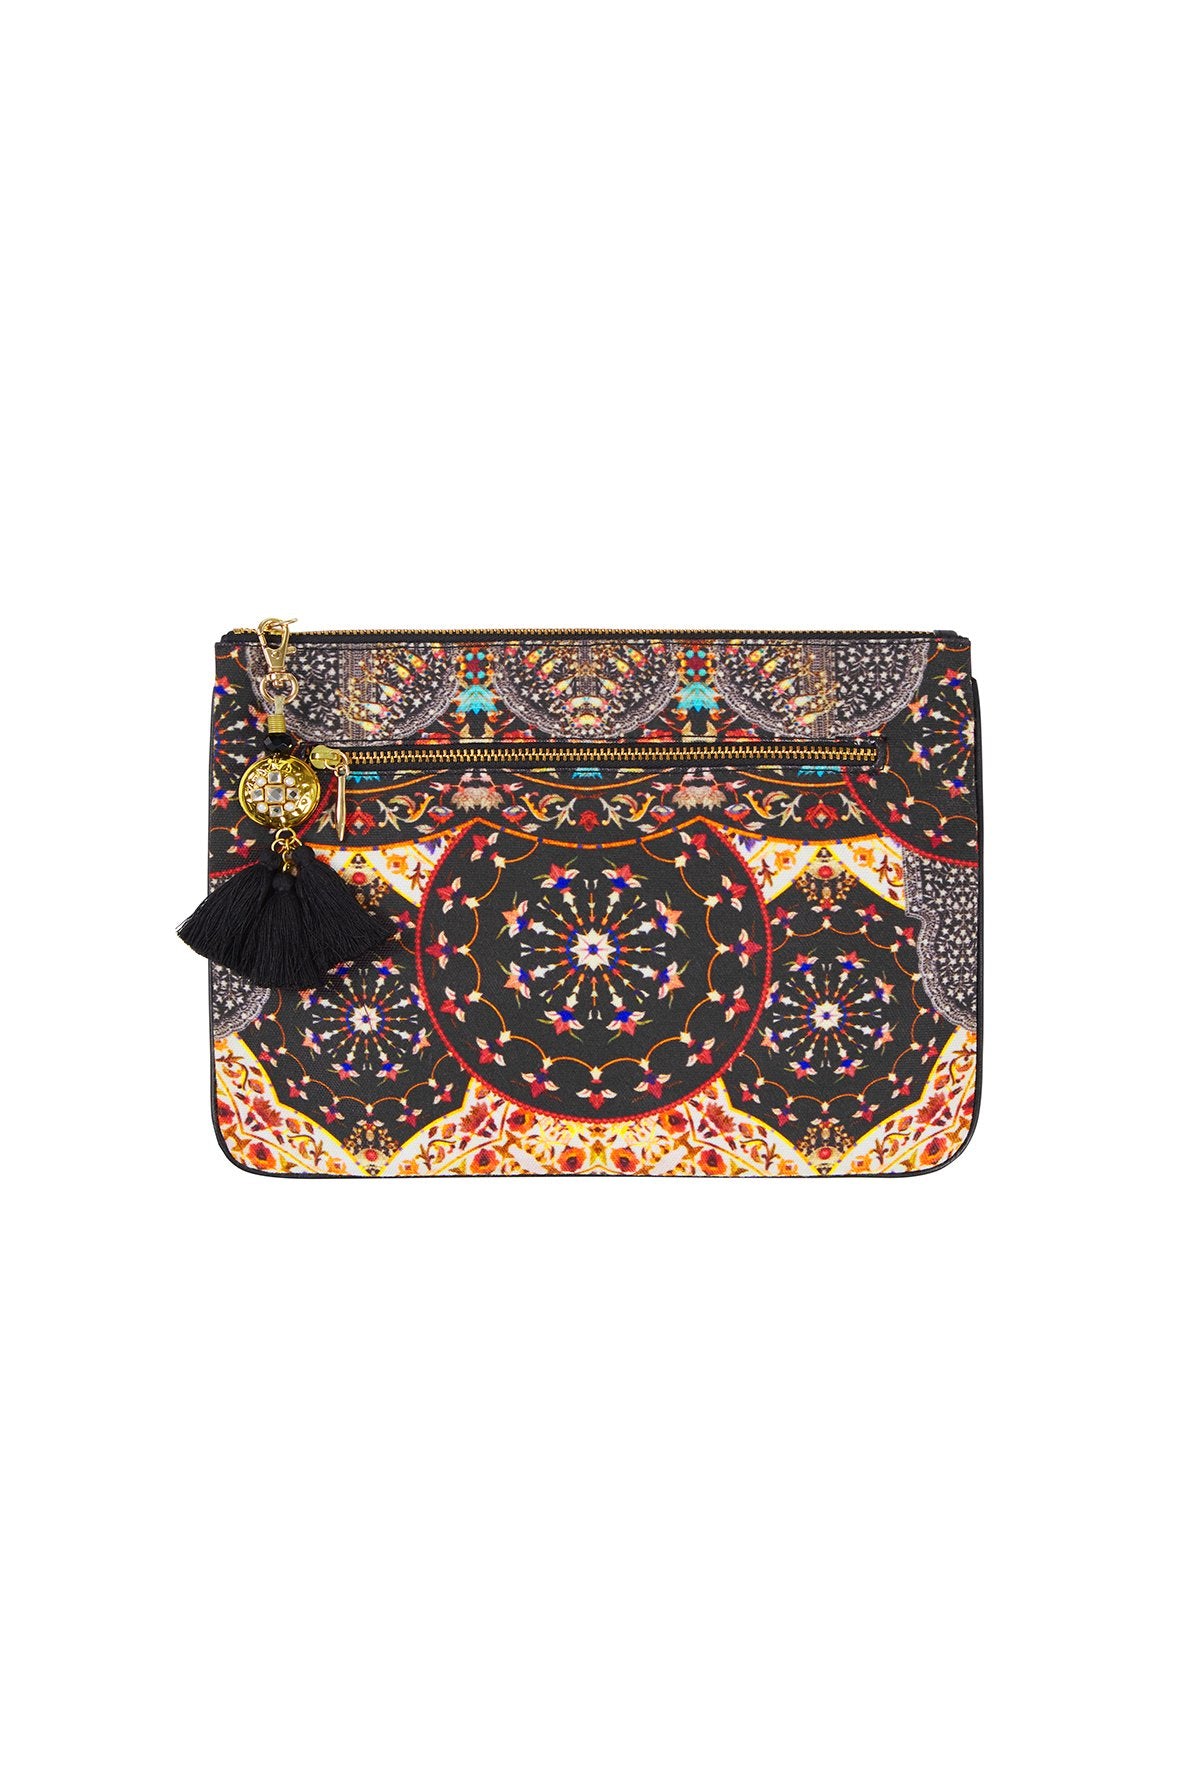 CHAMBER OF REFLECTIONS SMALL CANVAS CLUTCH